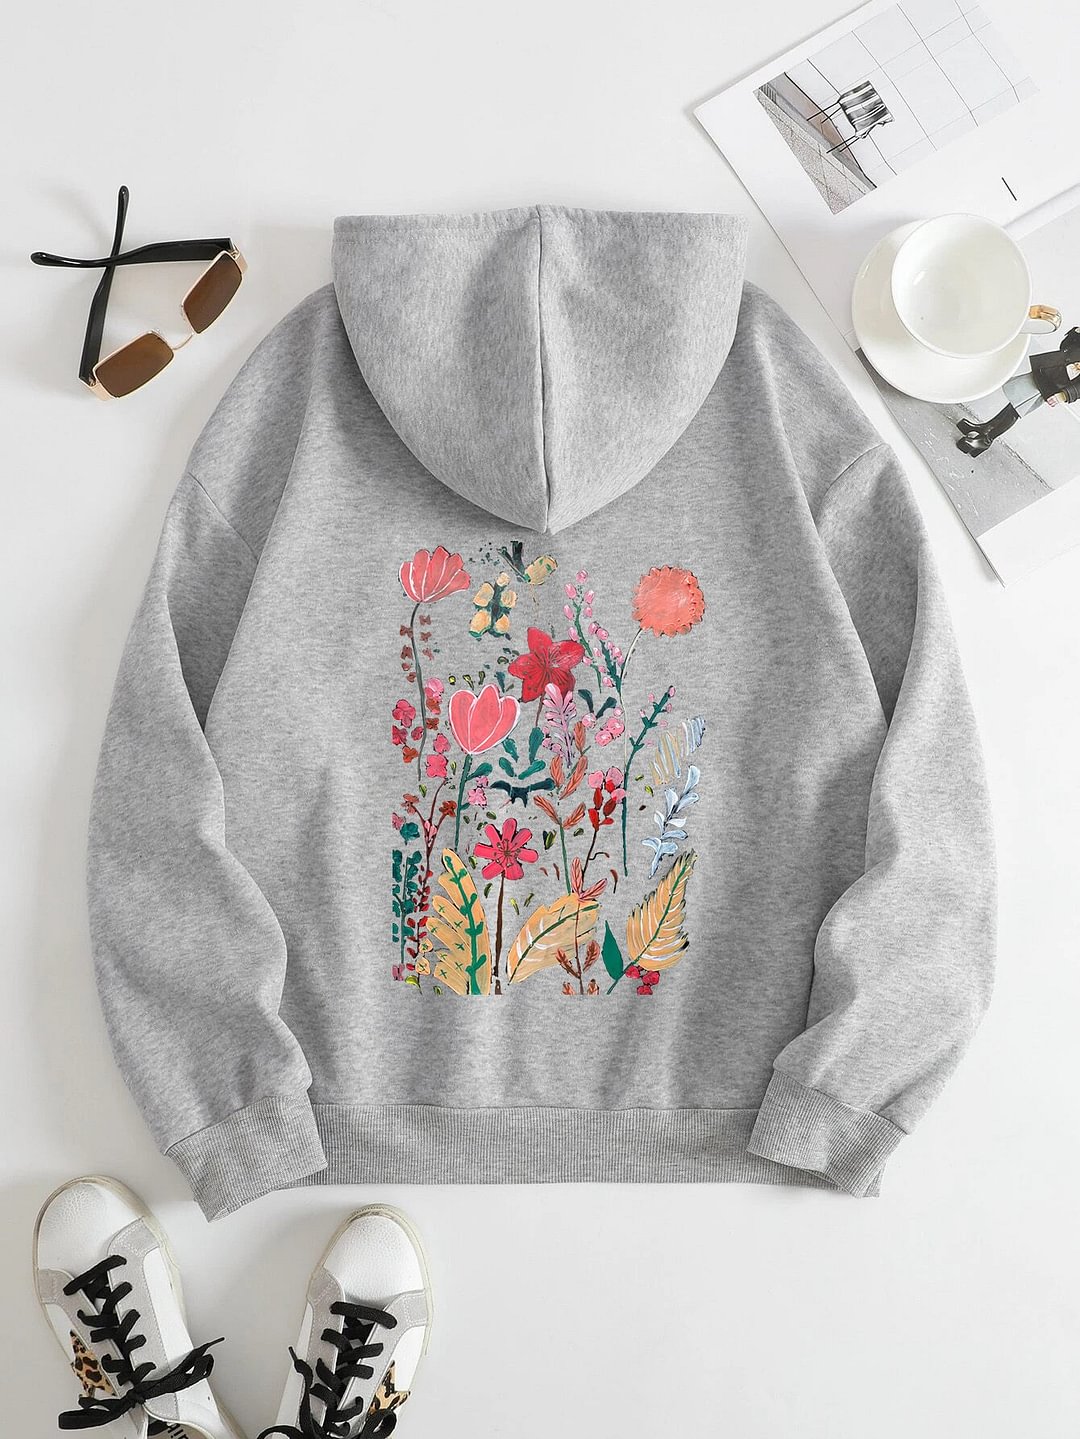 Printed On The Back Hoodie For Women Acrylic Painting Of Flowers Pattern